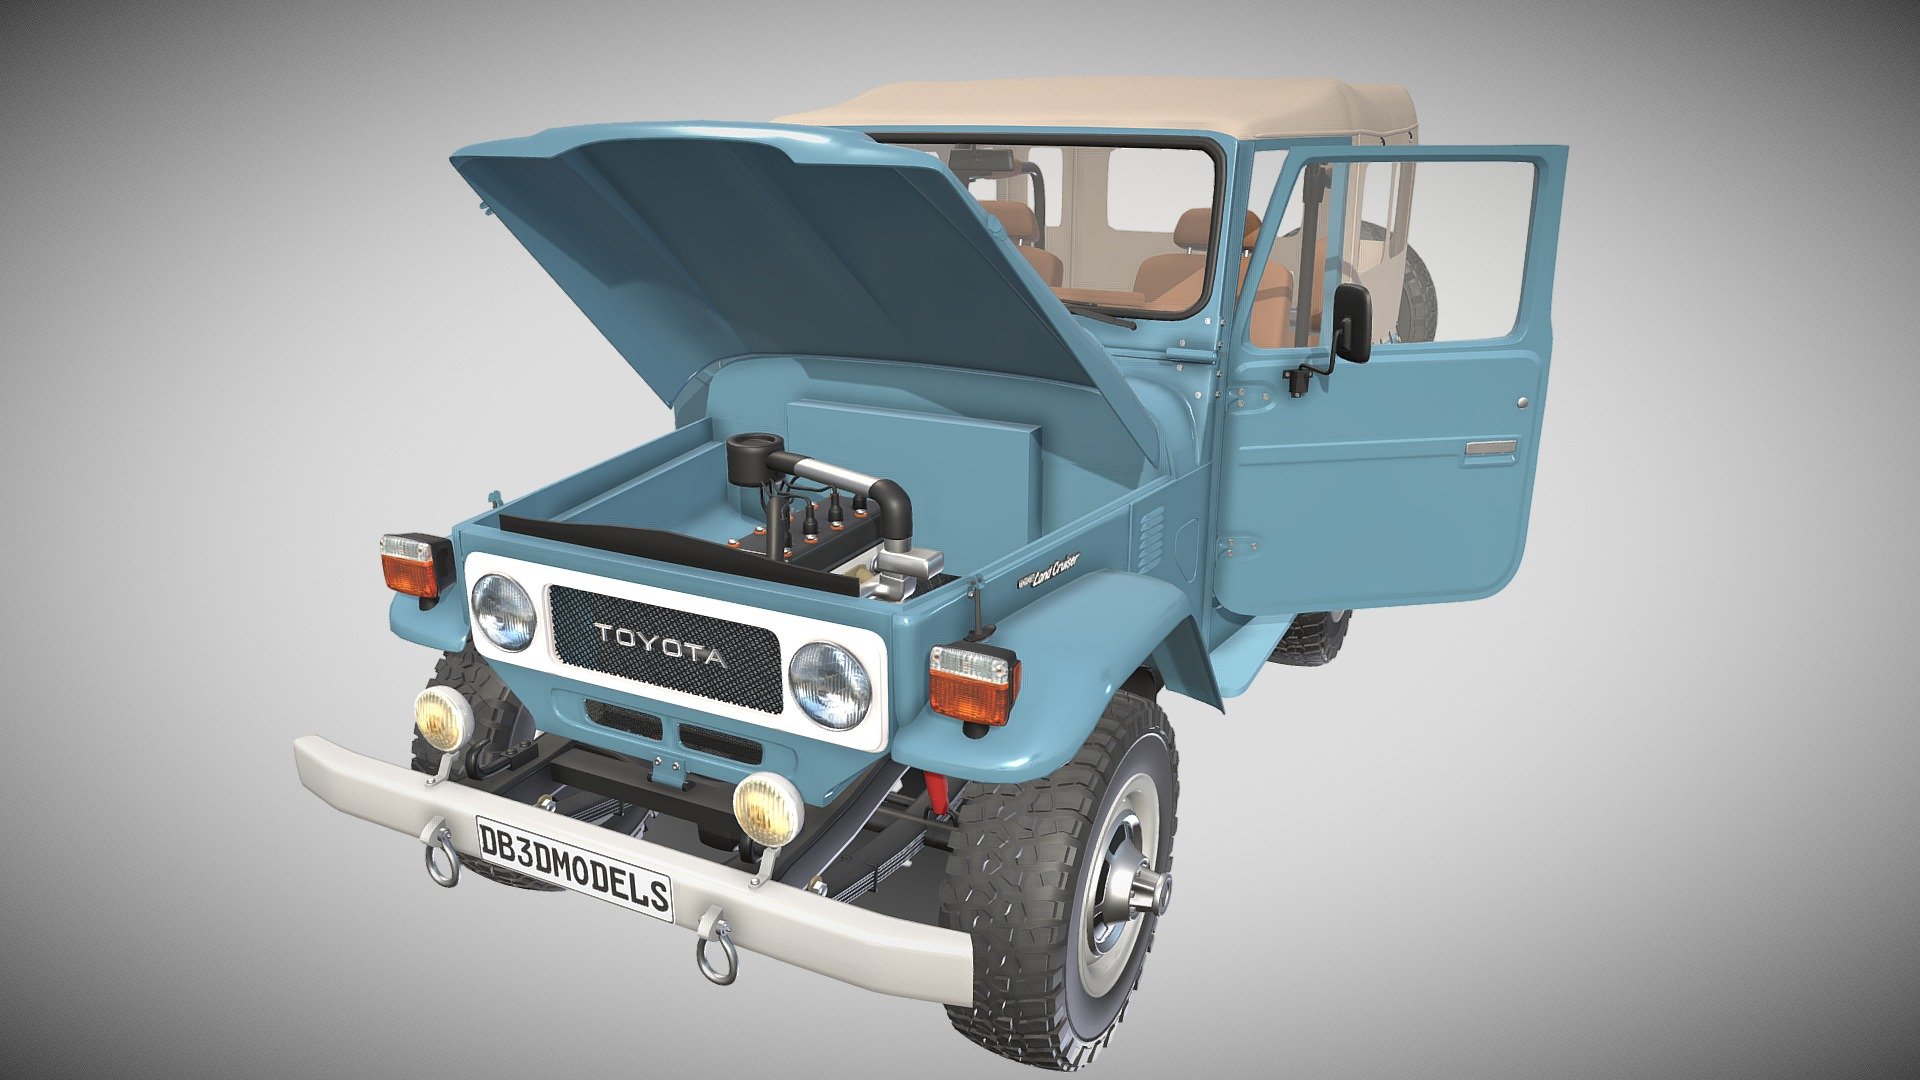 A very accurate model of the Toyota Land Cruiser FJ-40, with a HIGHLY DETAILED INTERIOR AND CHASSIS, WITH ENGINE, SUSPENSION AND BRAKES MODELED.

File formats:
-.blend, rendered with cycles, as seen in the images;
-.blend, rendered with cycles, with doors open, as seen in images;
-.obj, with materials applied and textures;
-.obj, with materials applied and textures and doors open;
-.dae, with materials applied and textures;
-.dae, with materials applied and textures and doors open;
-.fbx, with material slots applied;
-.fbx, with material slots applied and doors open;
-.stl;
-.stl with doors open;

3D Software:
This 3d model was originally created in Blender 2.79 and rendered with Cycles.

Materials and textures:
The model has materials applied in all formats, and is ready to import and render.
The model comes with multiple png image textures 3d model